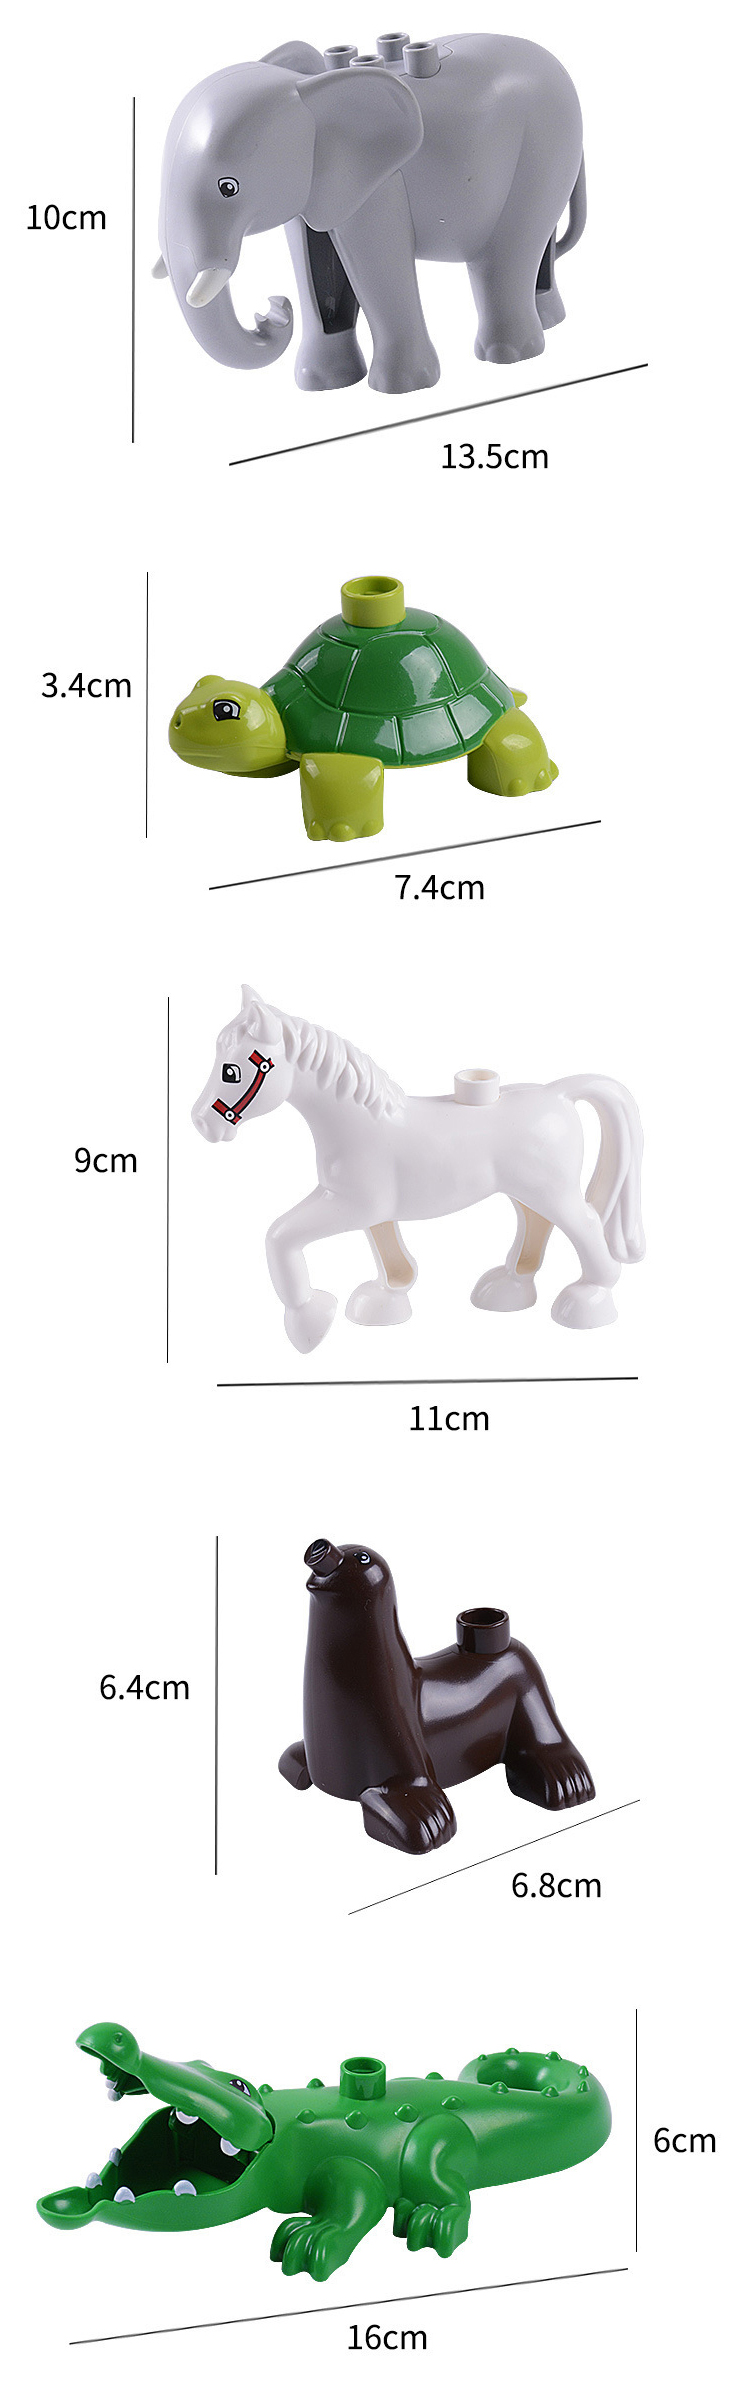 WOMA TOYS Amazon Hot Sale Baby Play Animal Tiger Horse Elephant ABS Plastic Large Particles Bricks Big Building Block